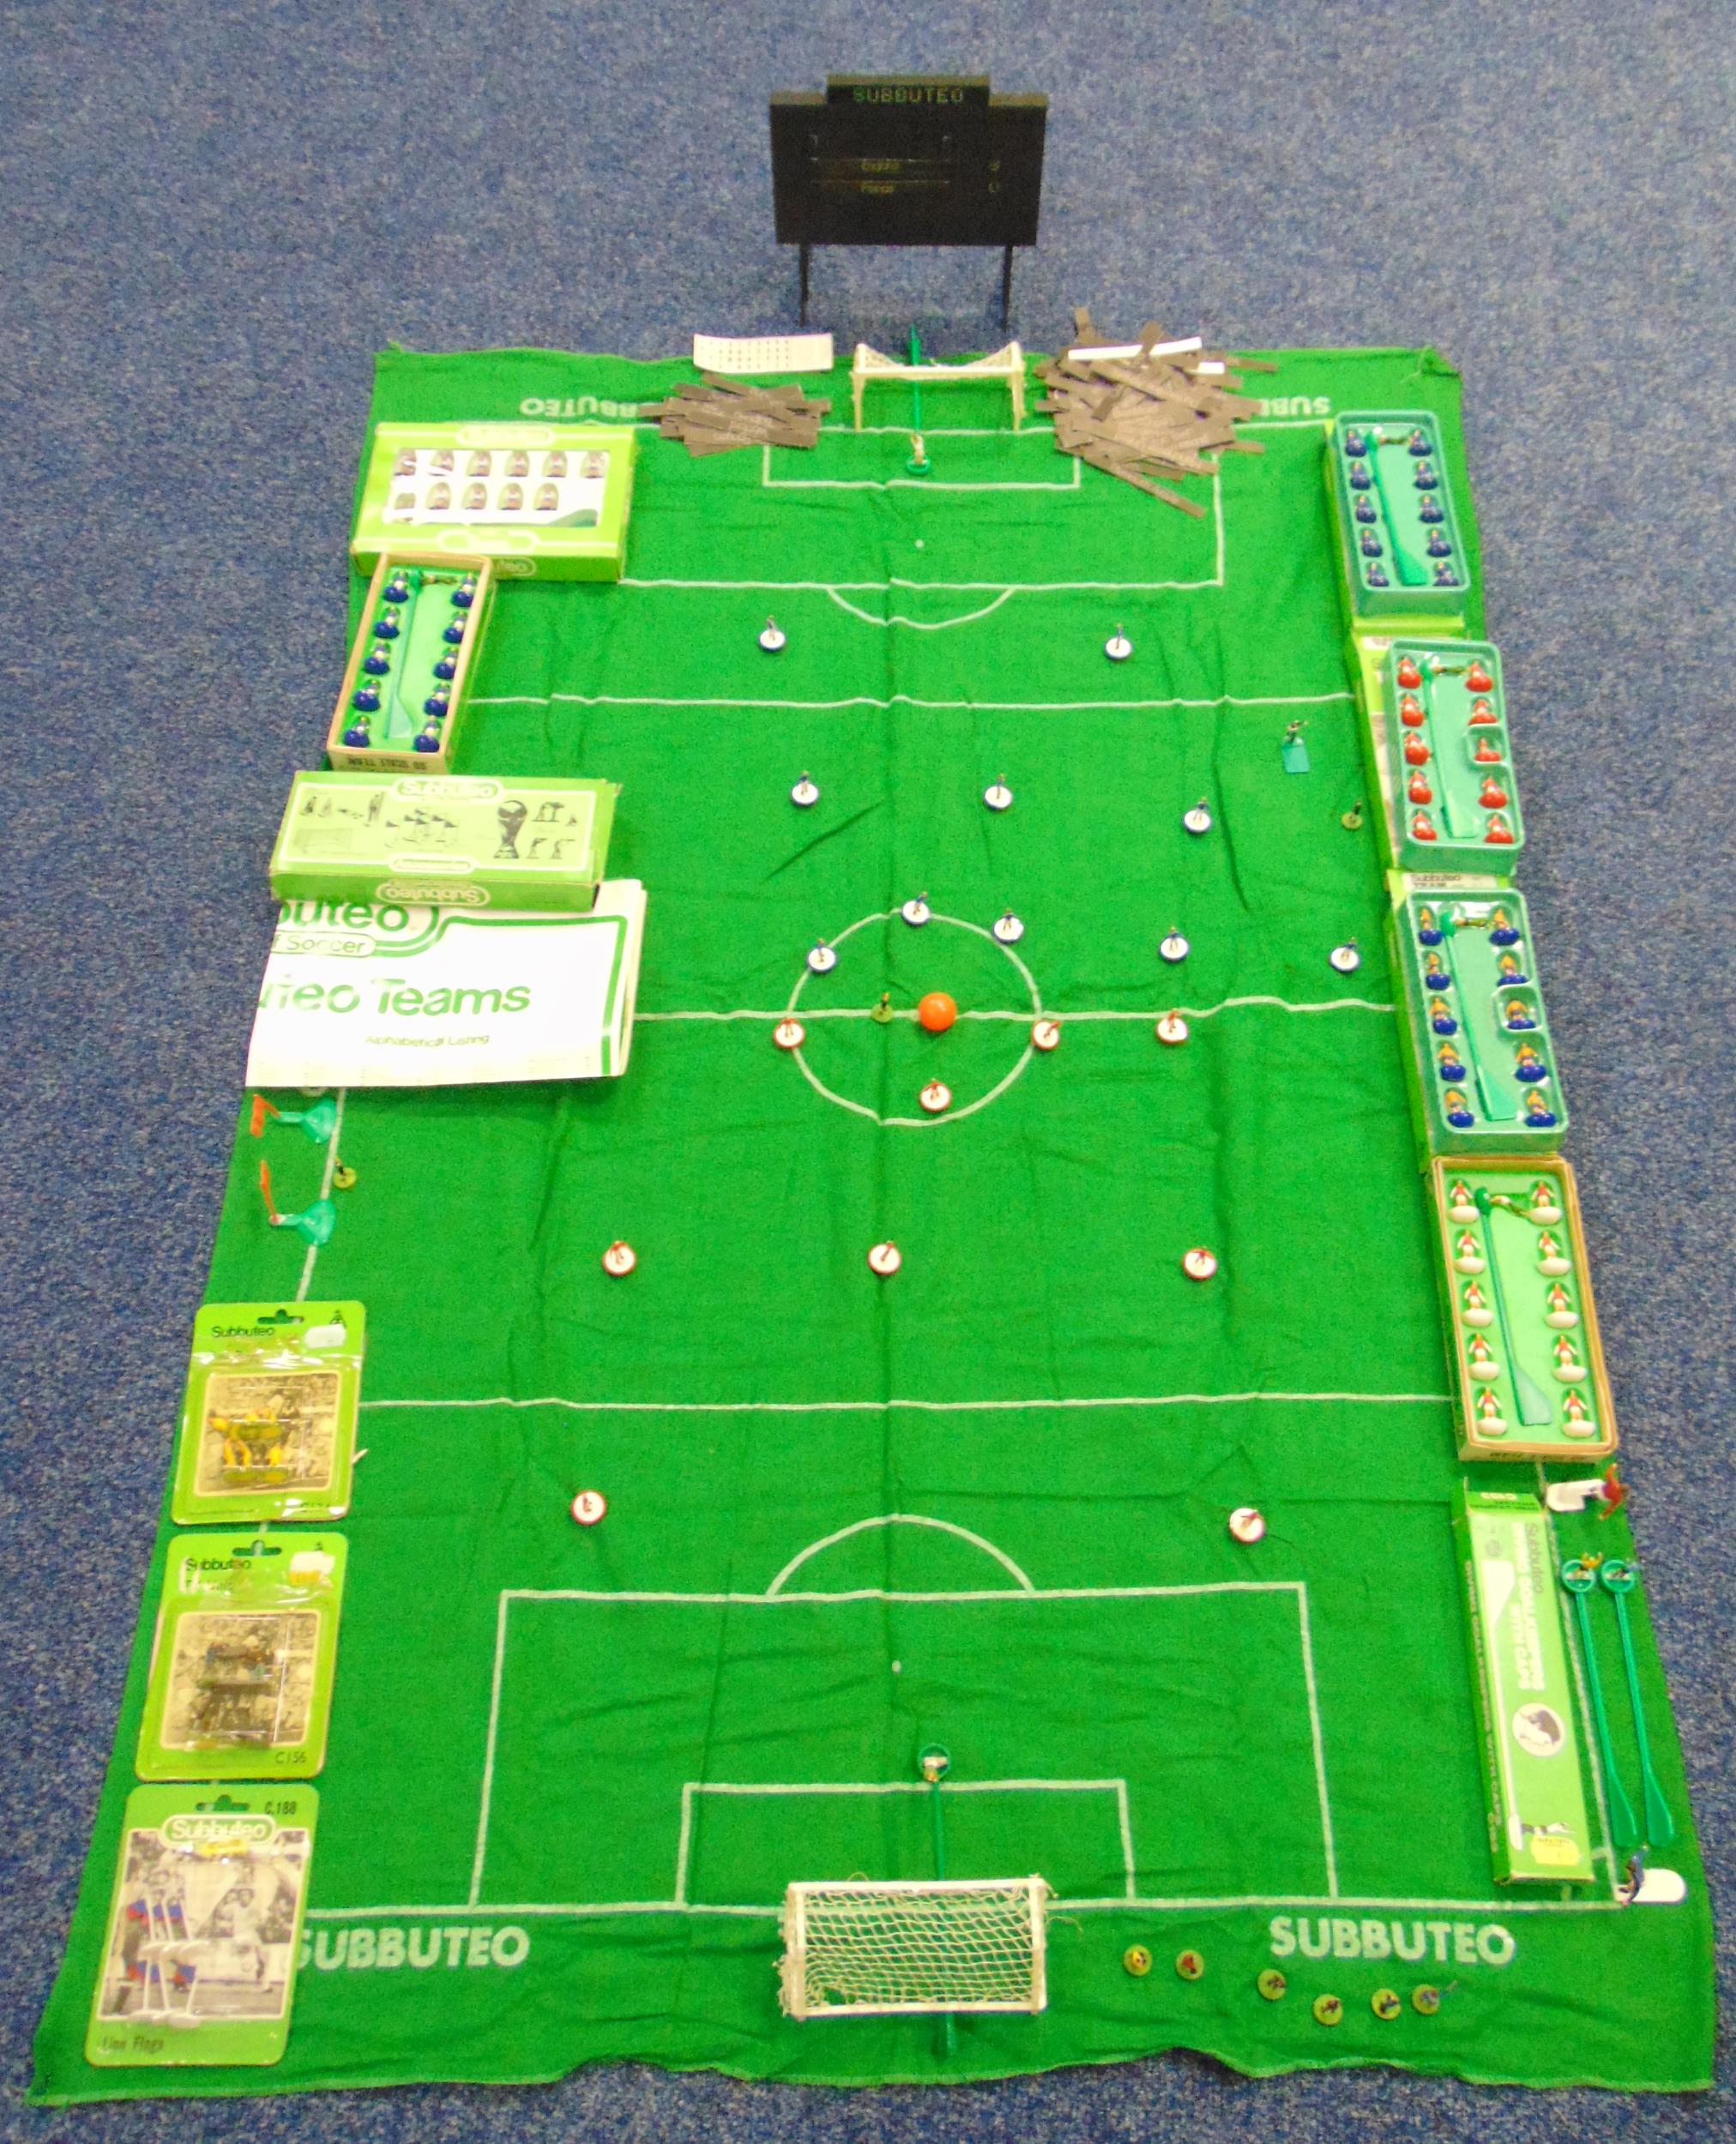 A quantity of Subbuteo table soccer to include teams, goals, a layout and accessories